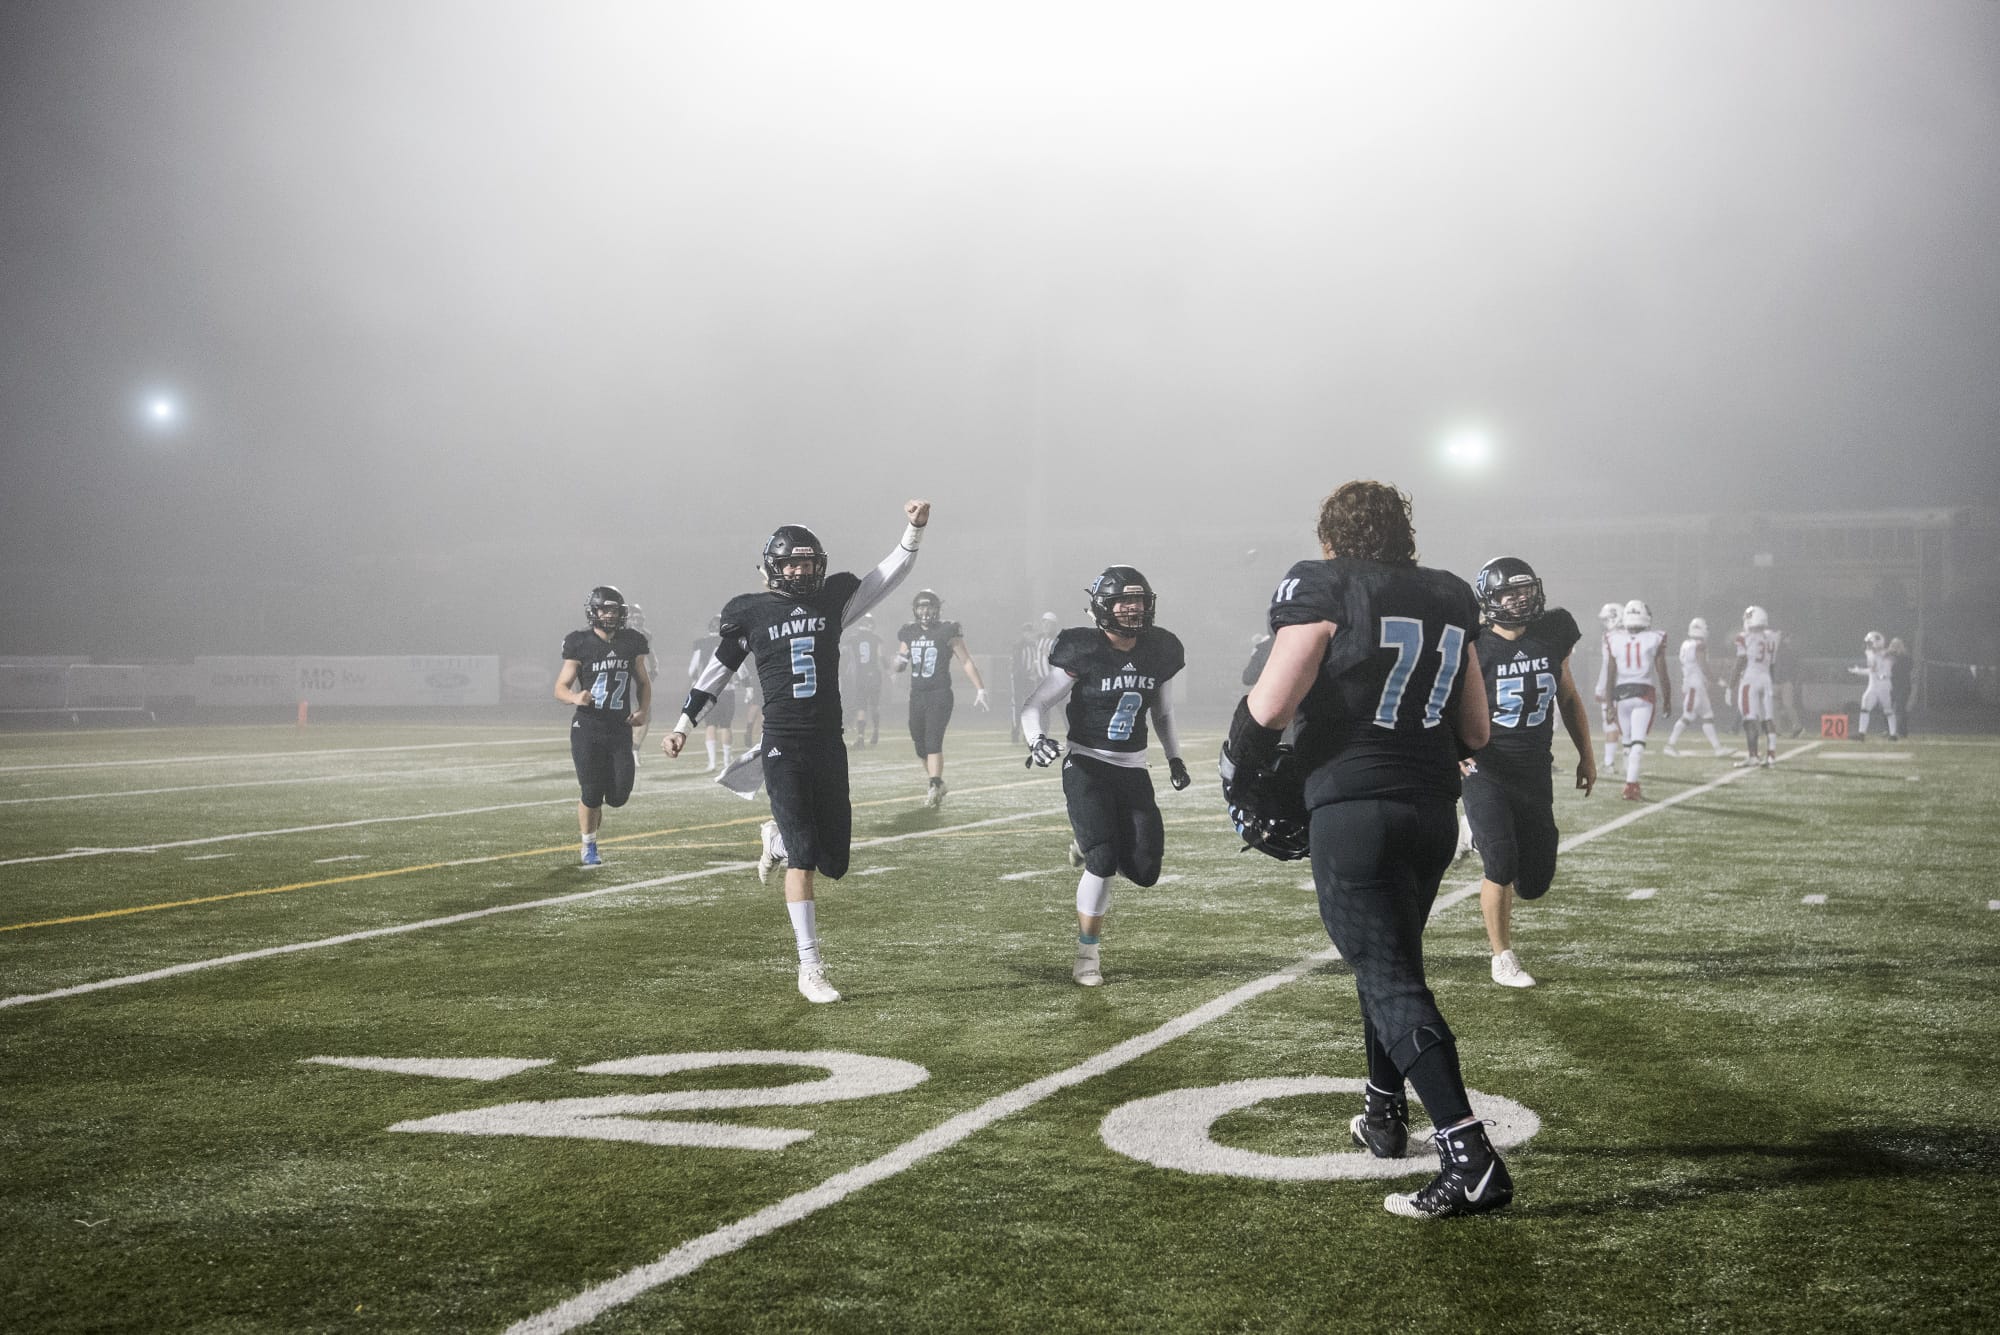 Hockinson celebrates a Steilacoom turnover during the 2A state football quarterfinals at Doc Harris Stadium in Camas on Friday, Nov. 16, 2018. Hockinson defeated Steilacoom 35-28.